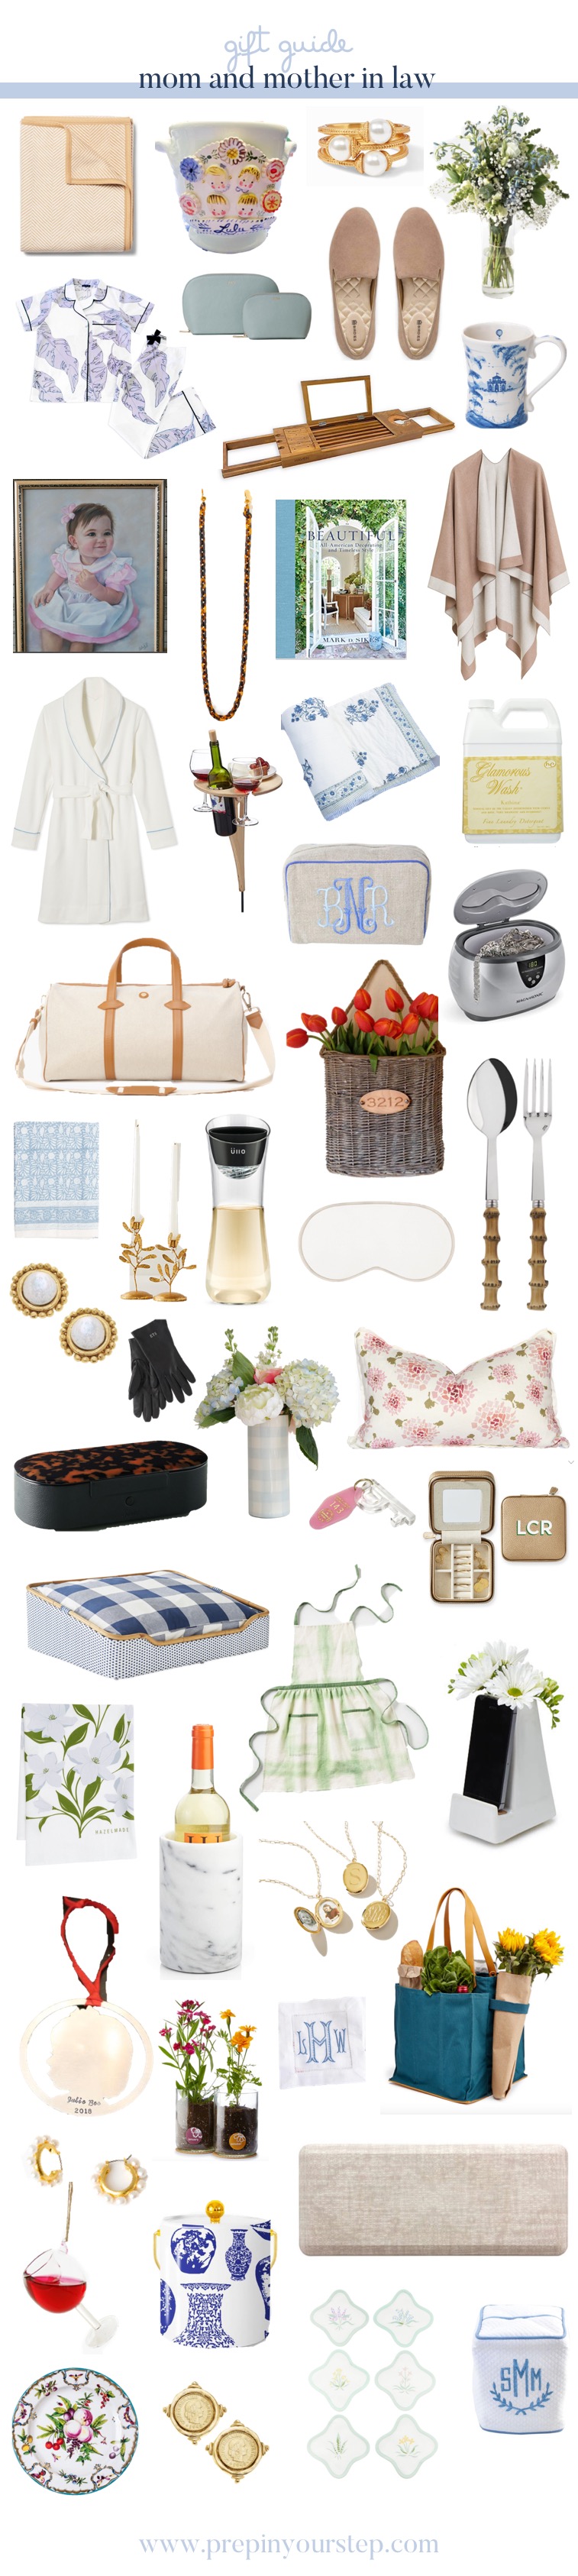 Gift Guide 2023: Mother-In-Law - The Motherchic